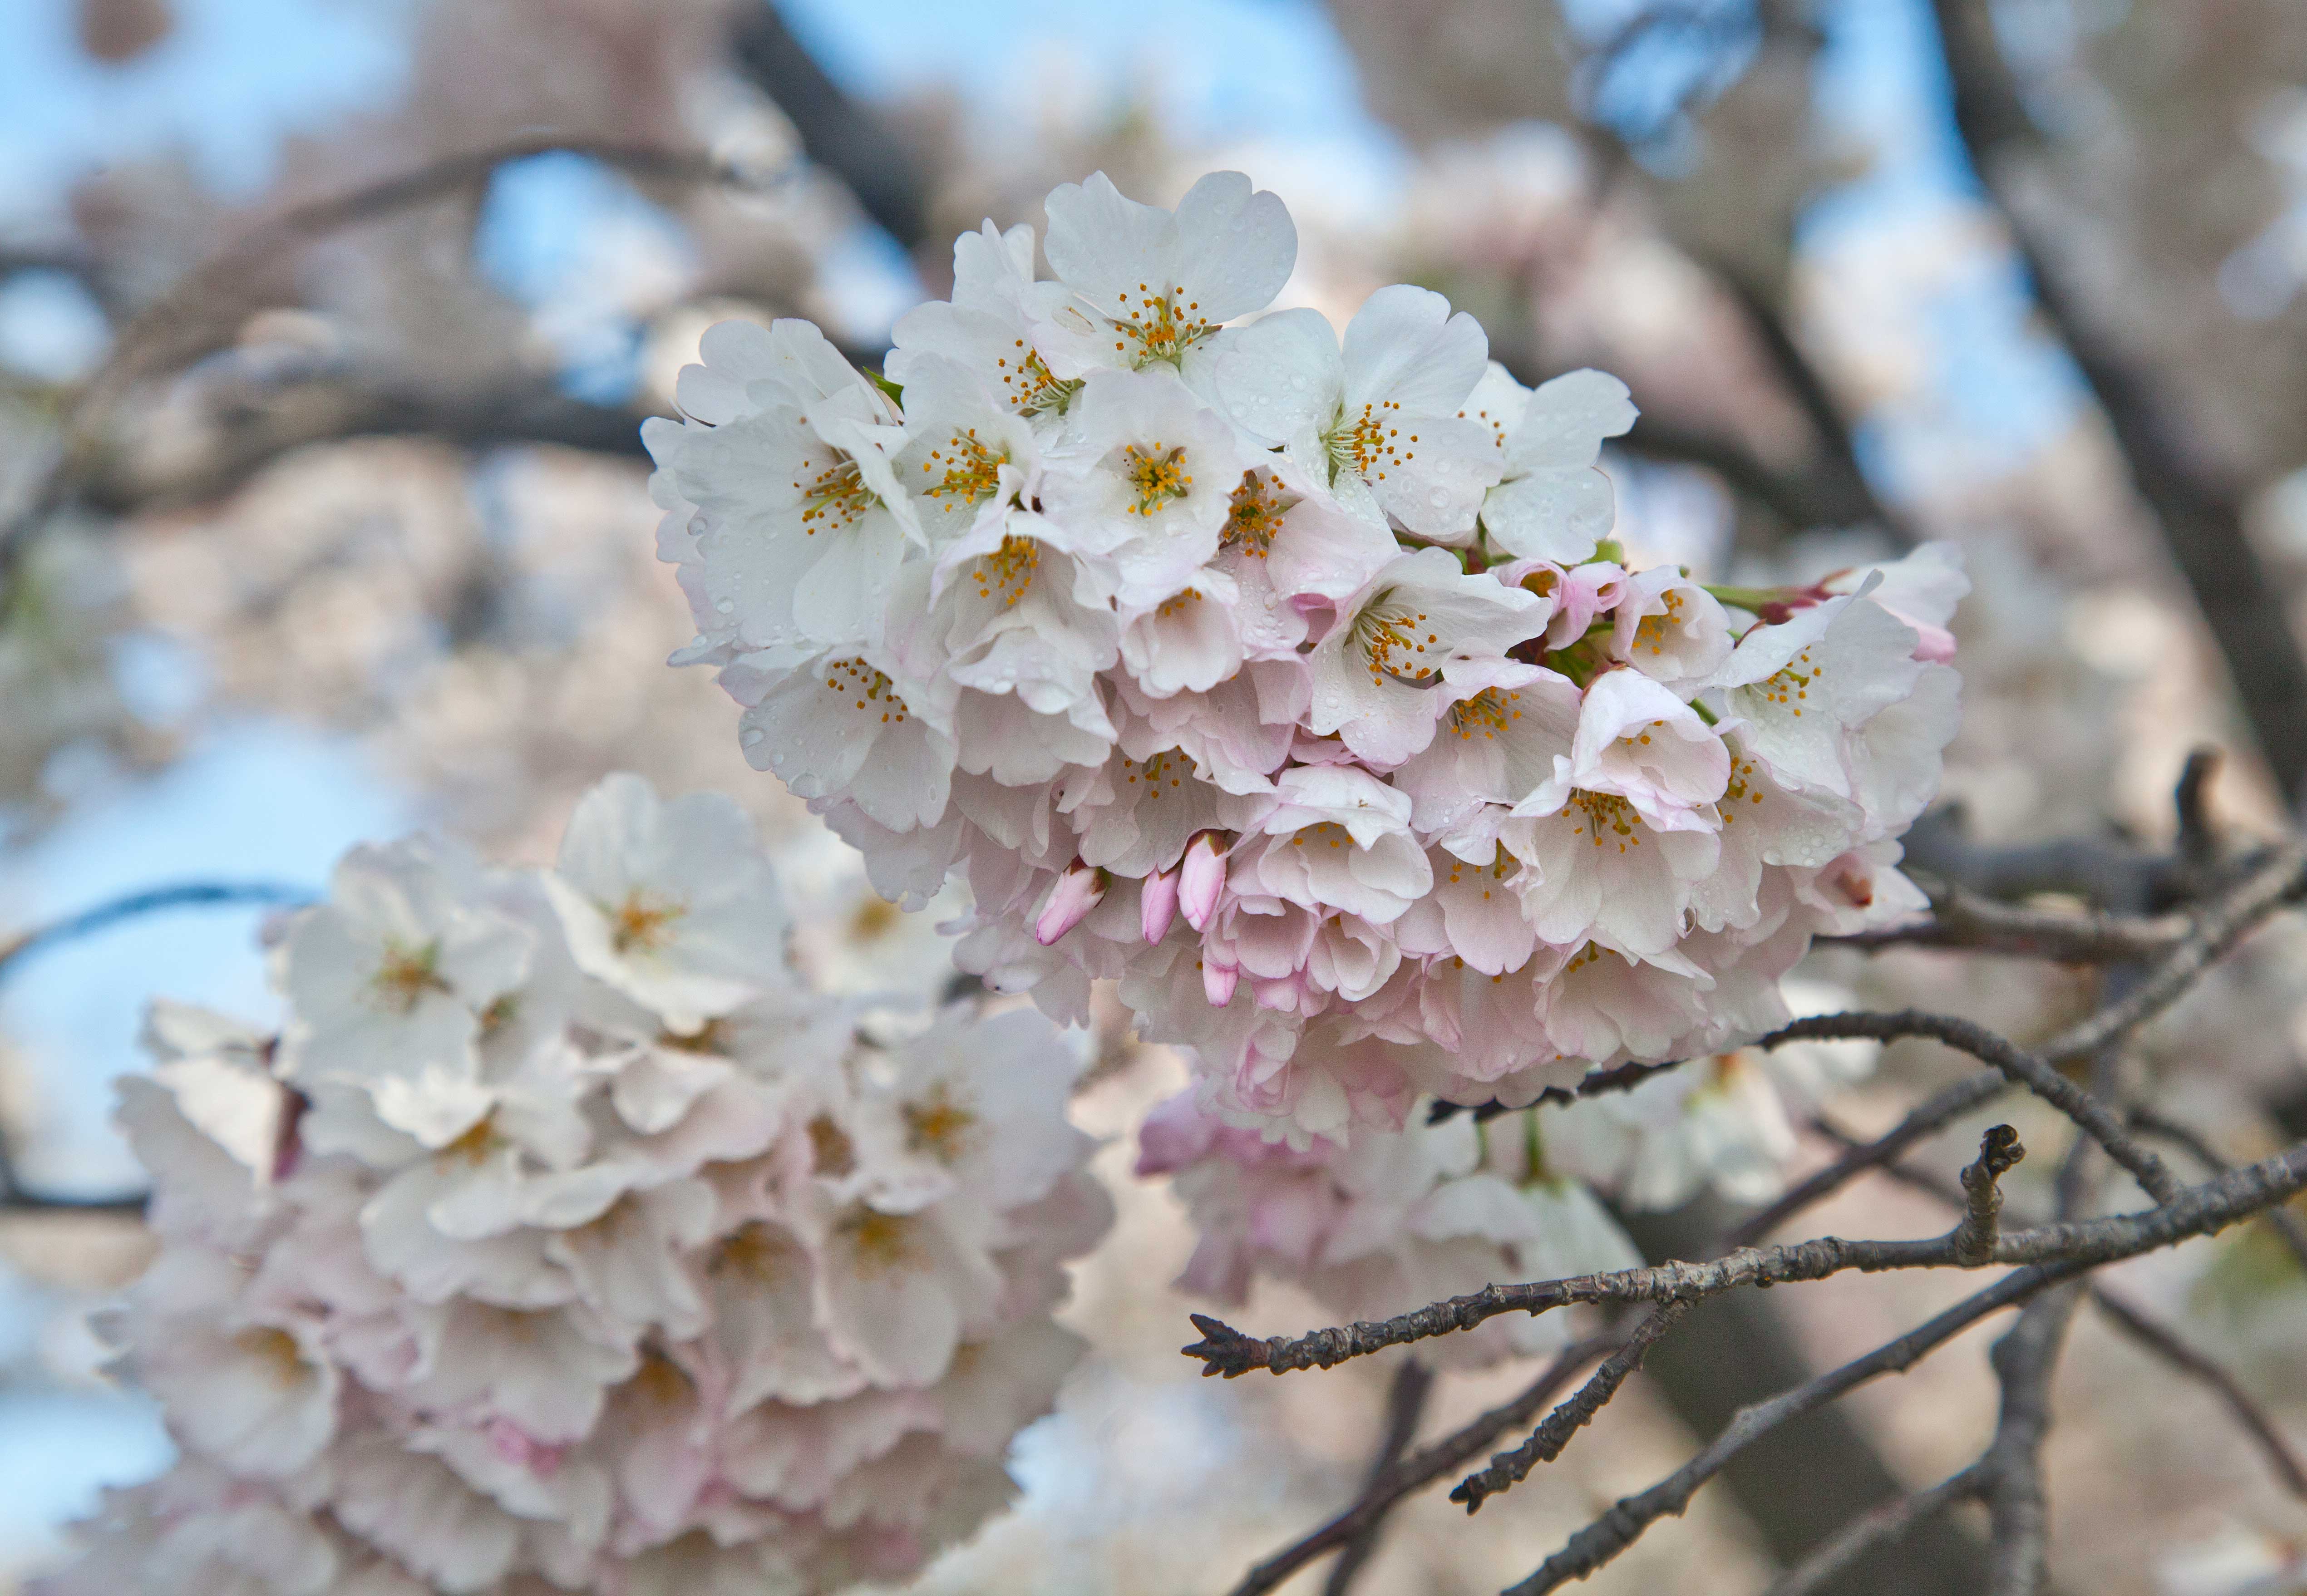 Why is it called cherry blossom?